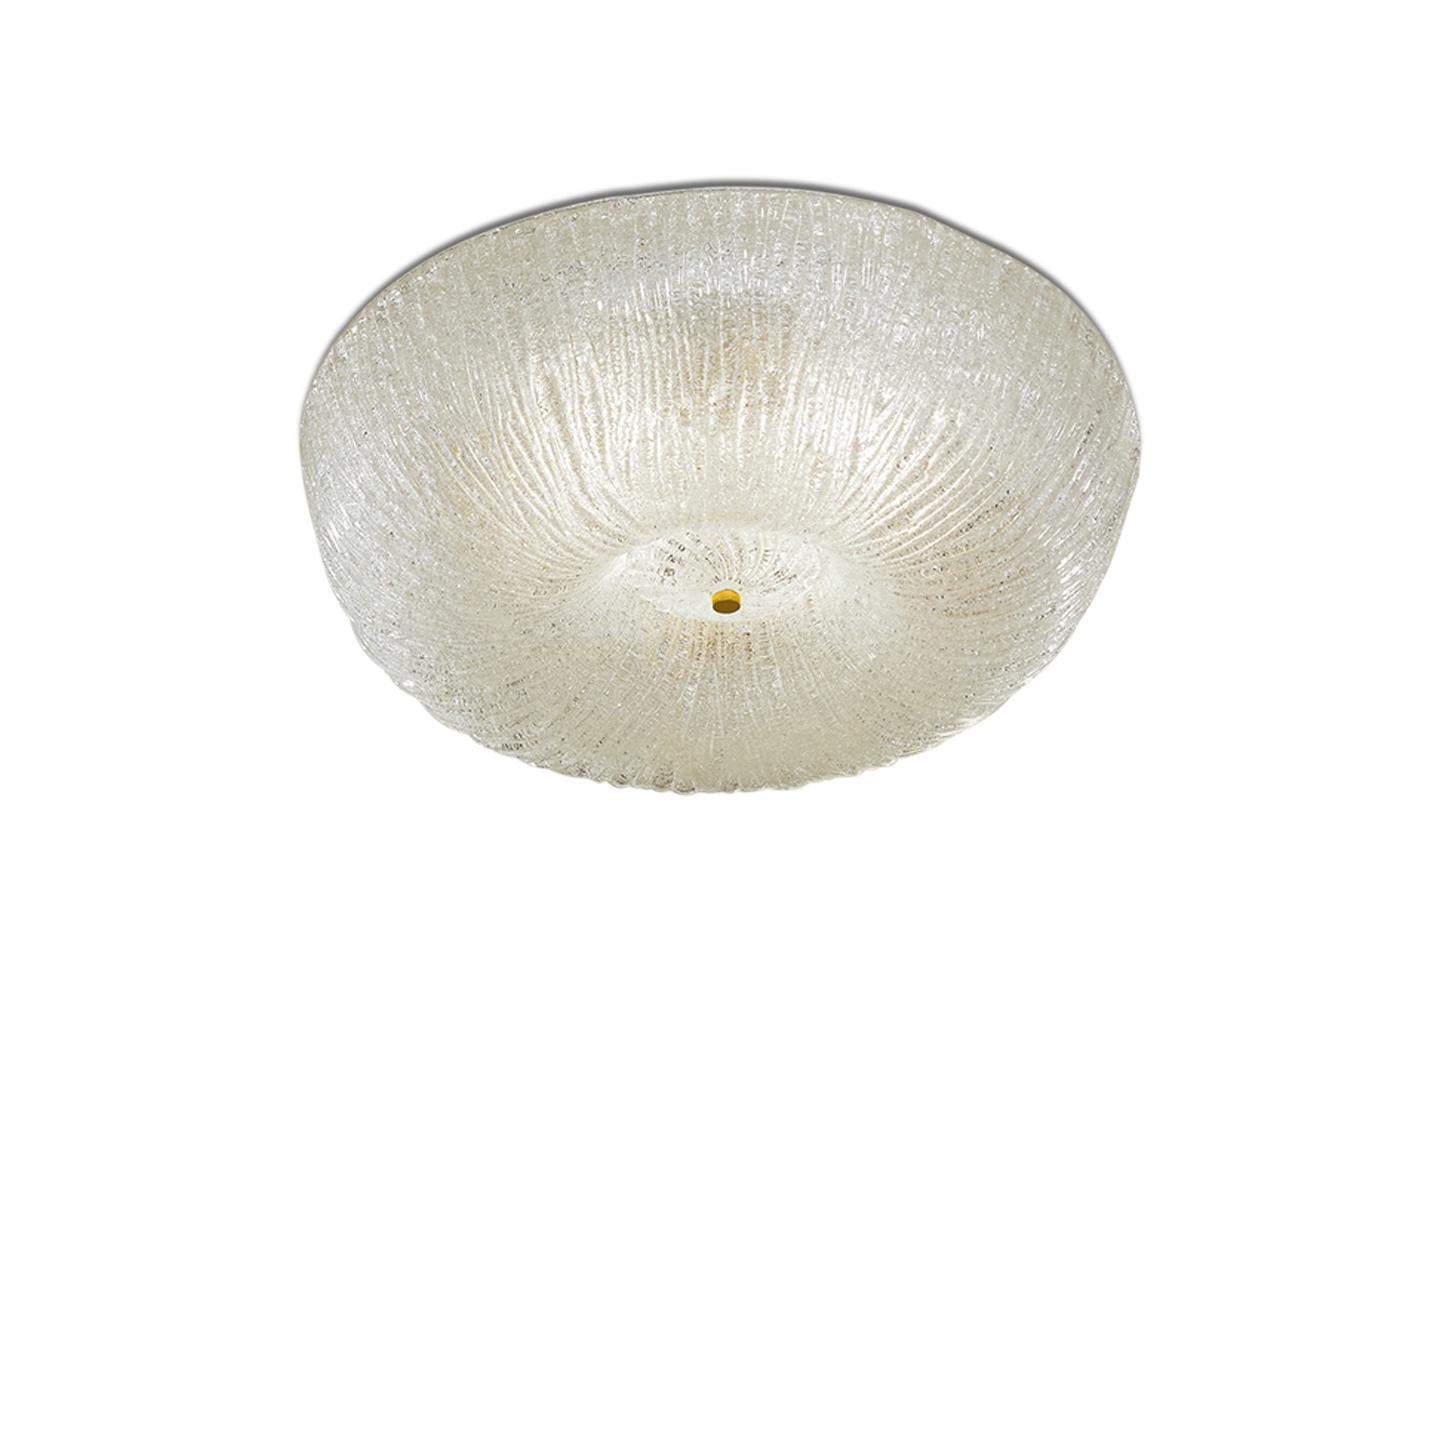 Campiello comes from the historical archives of Leucos, updating the traditional use of Graniglia crystal to create a beautiful ceiling lamp. Graniglia Glass is made by pressing fracco (crystal shards) into the backside of hand-cast glass. The